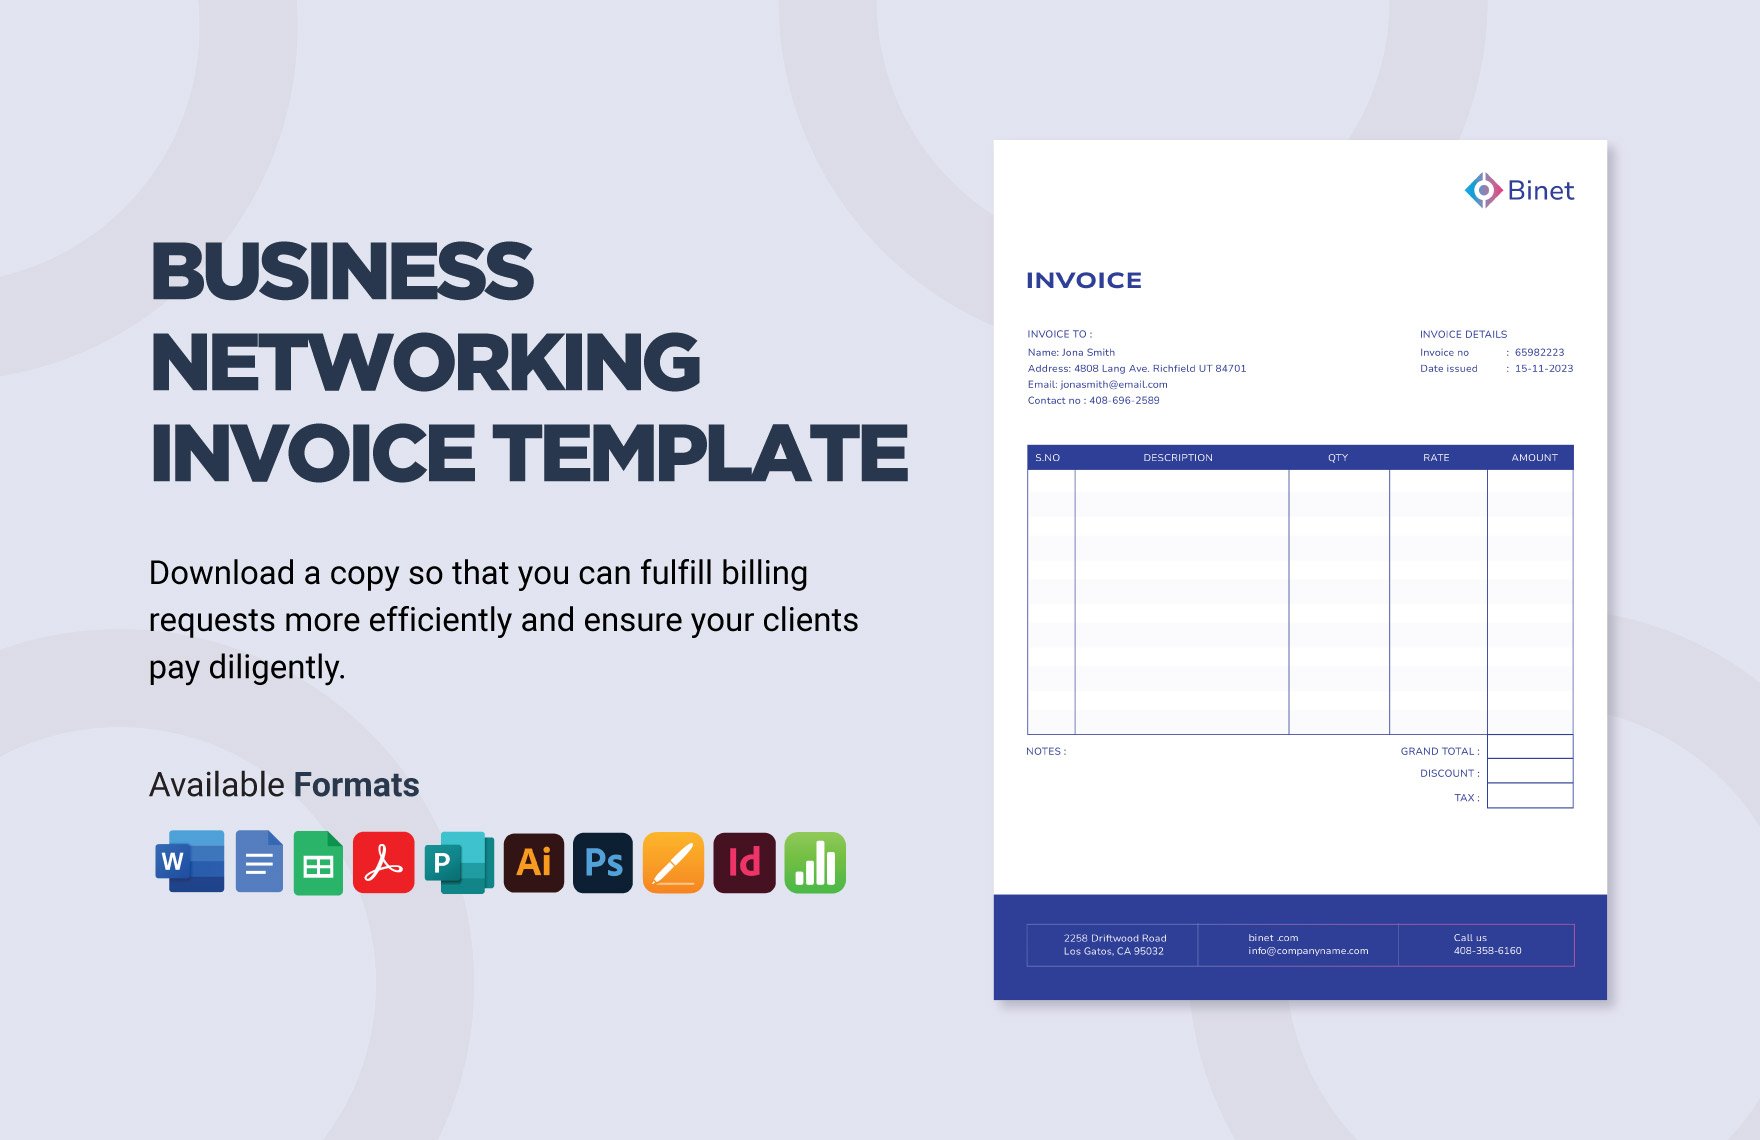 Business Networking Invoice Template